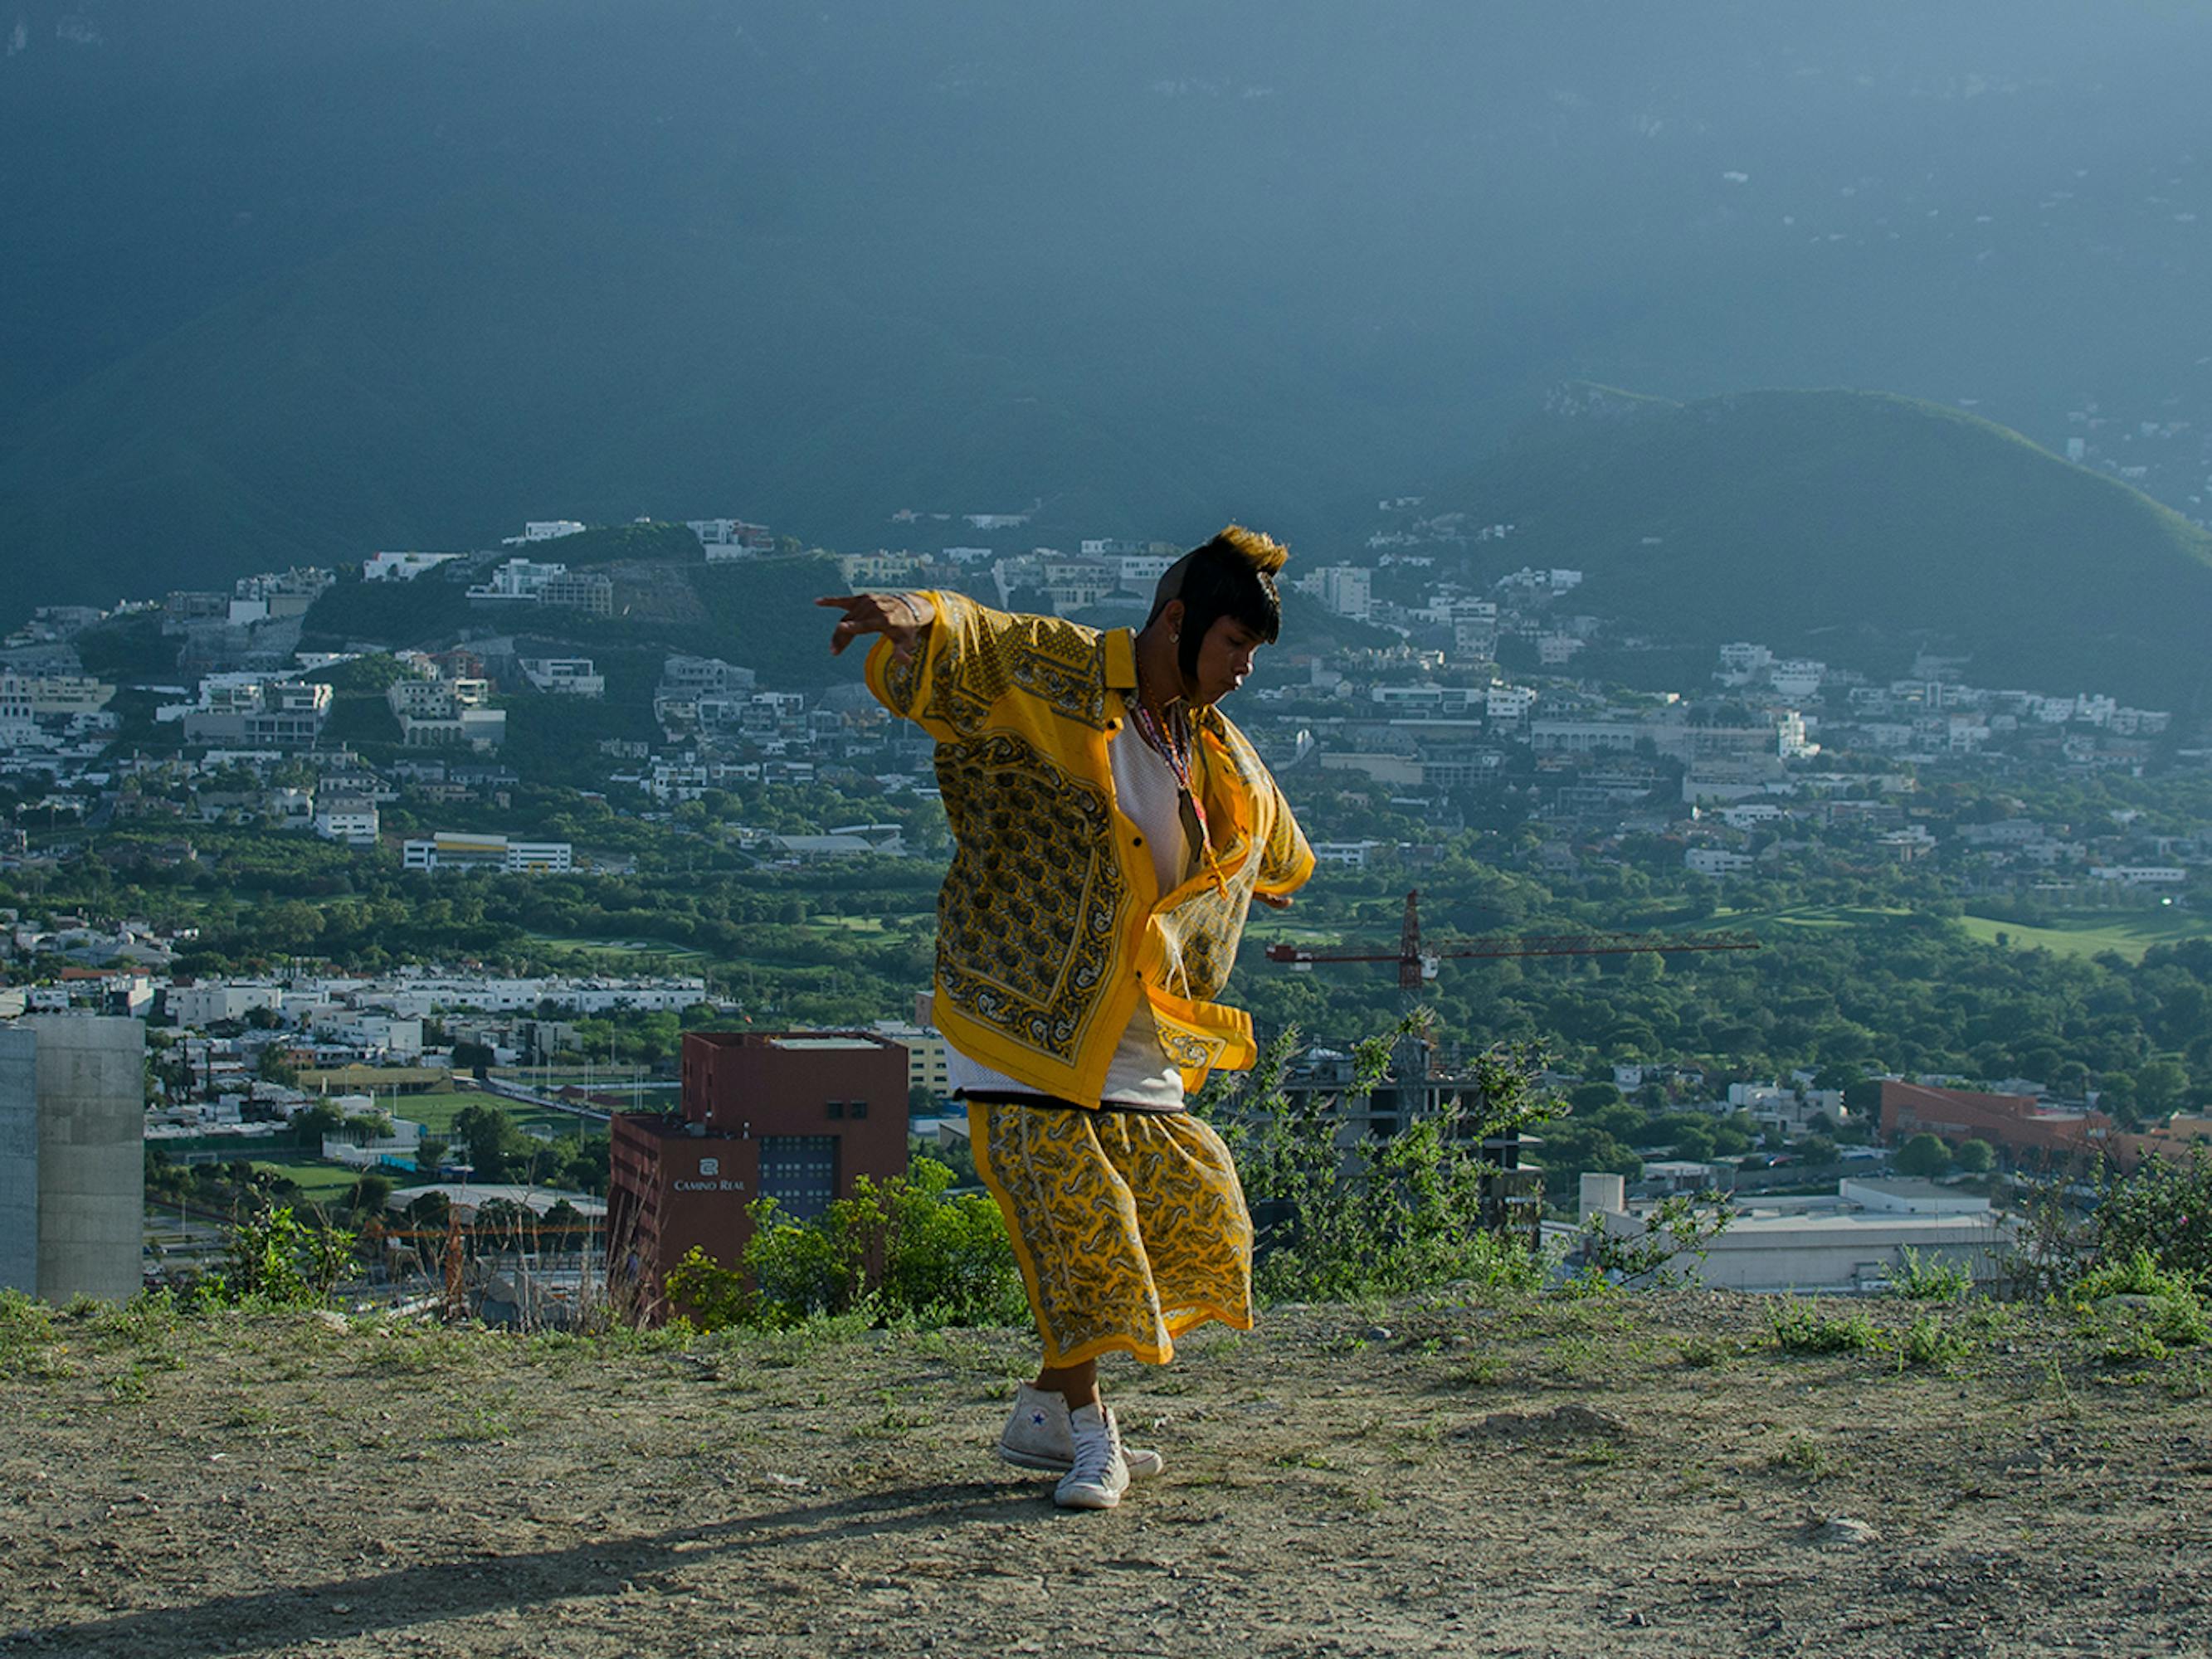 The main character from I’m No Longer Here dances to cumbia music in a yellow outfit. 